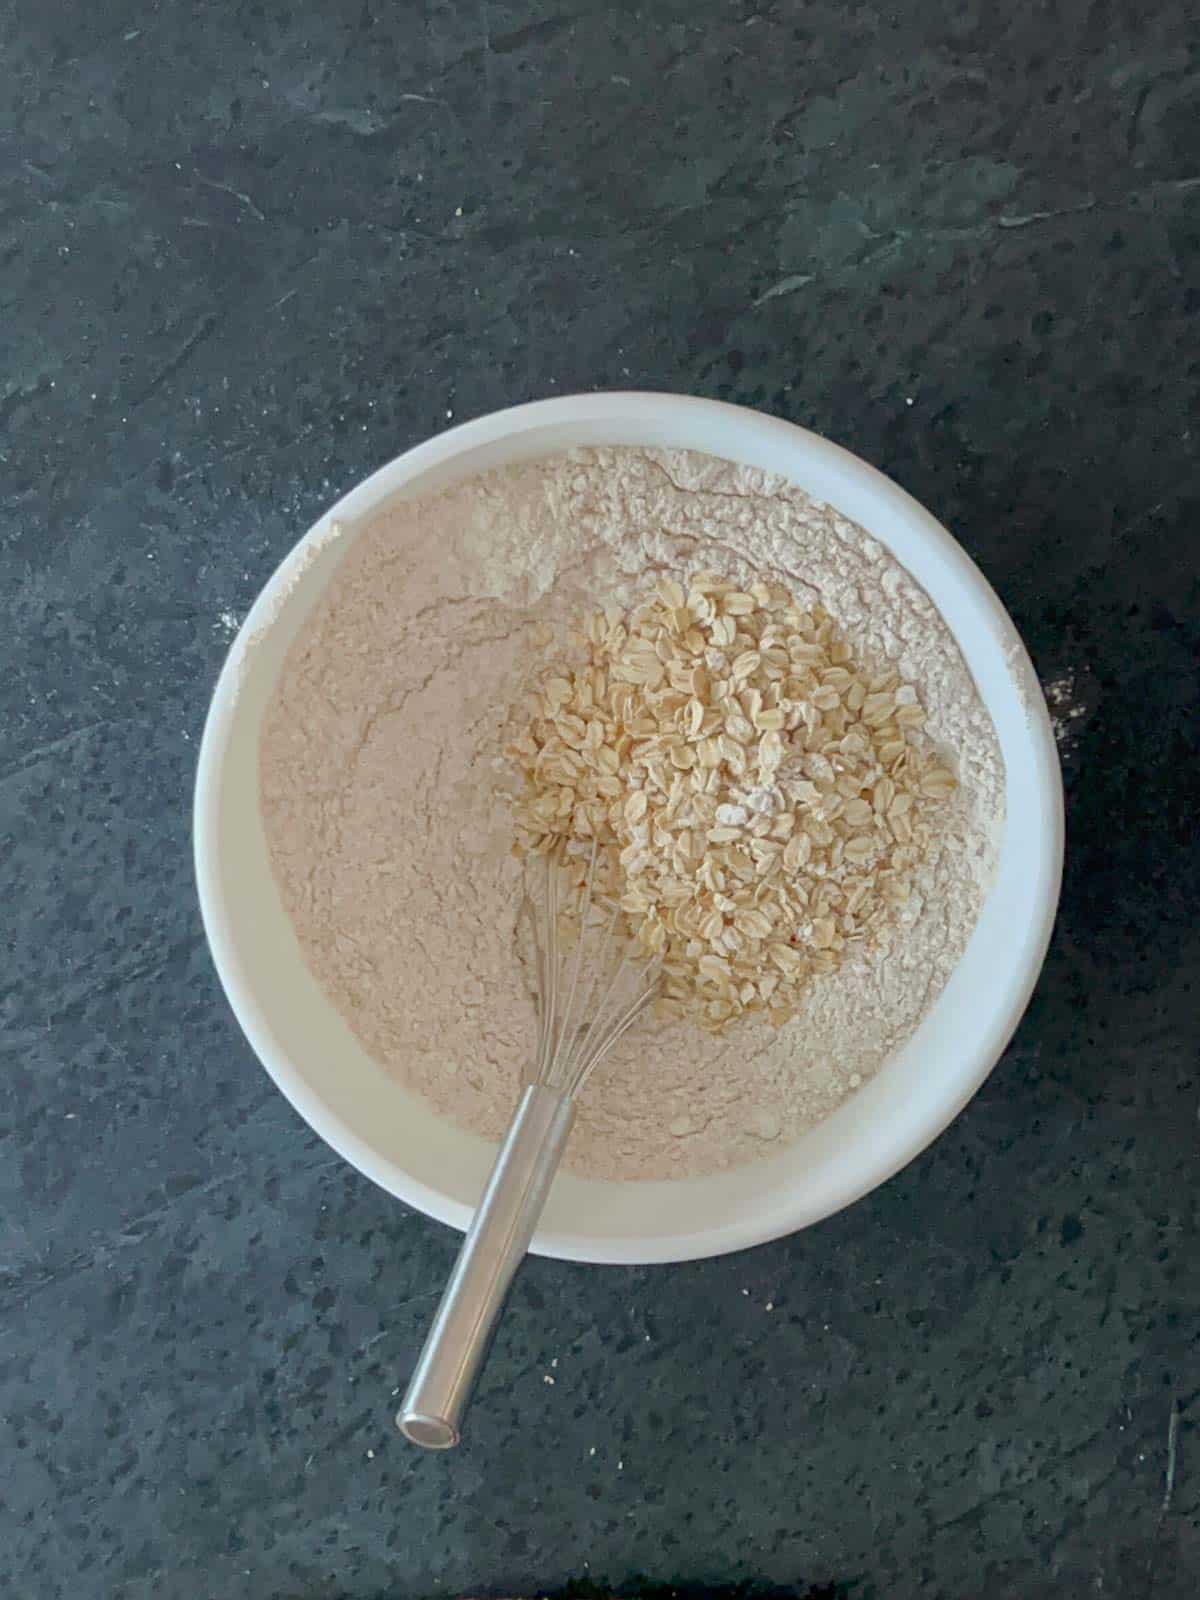 add the oats, don't use instant oats. 